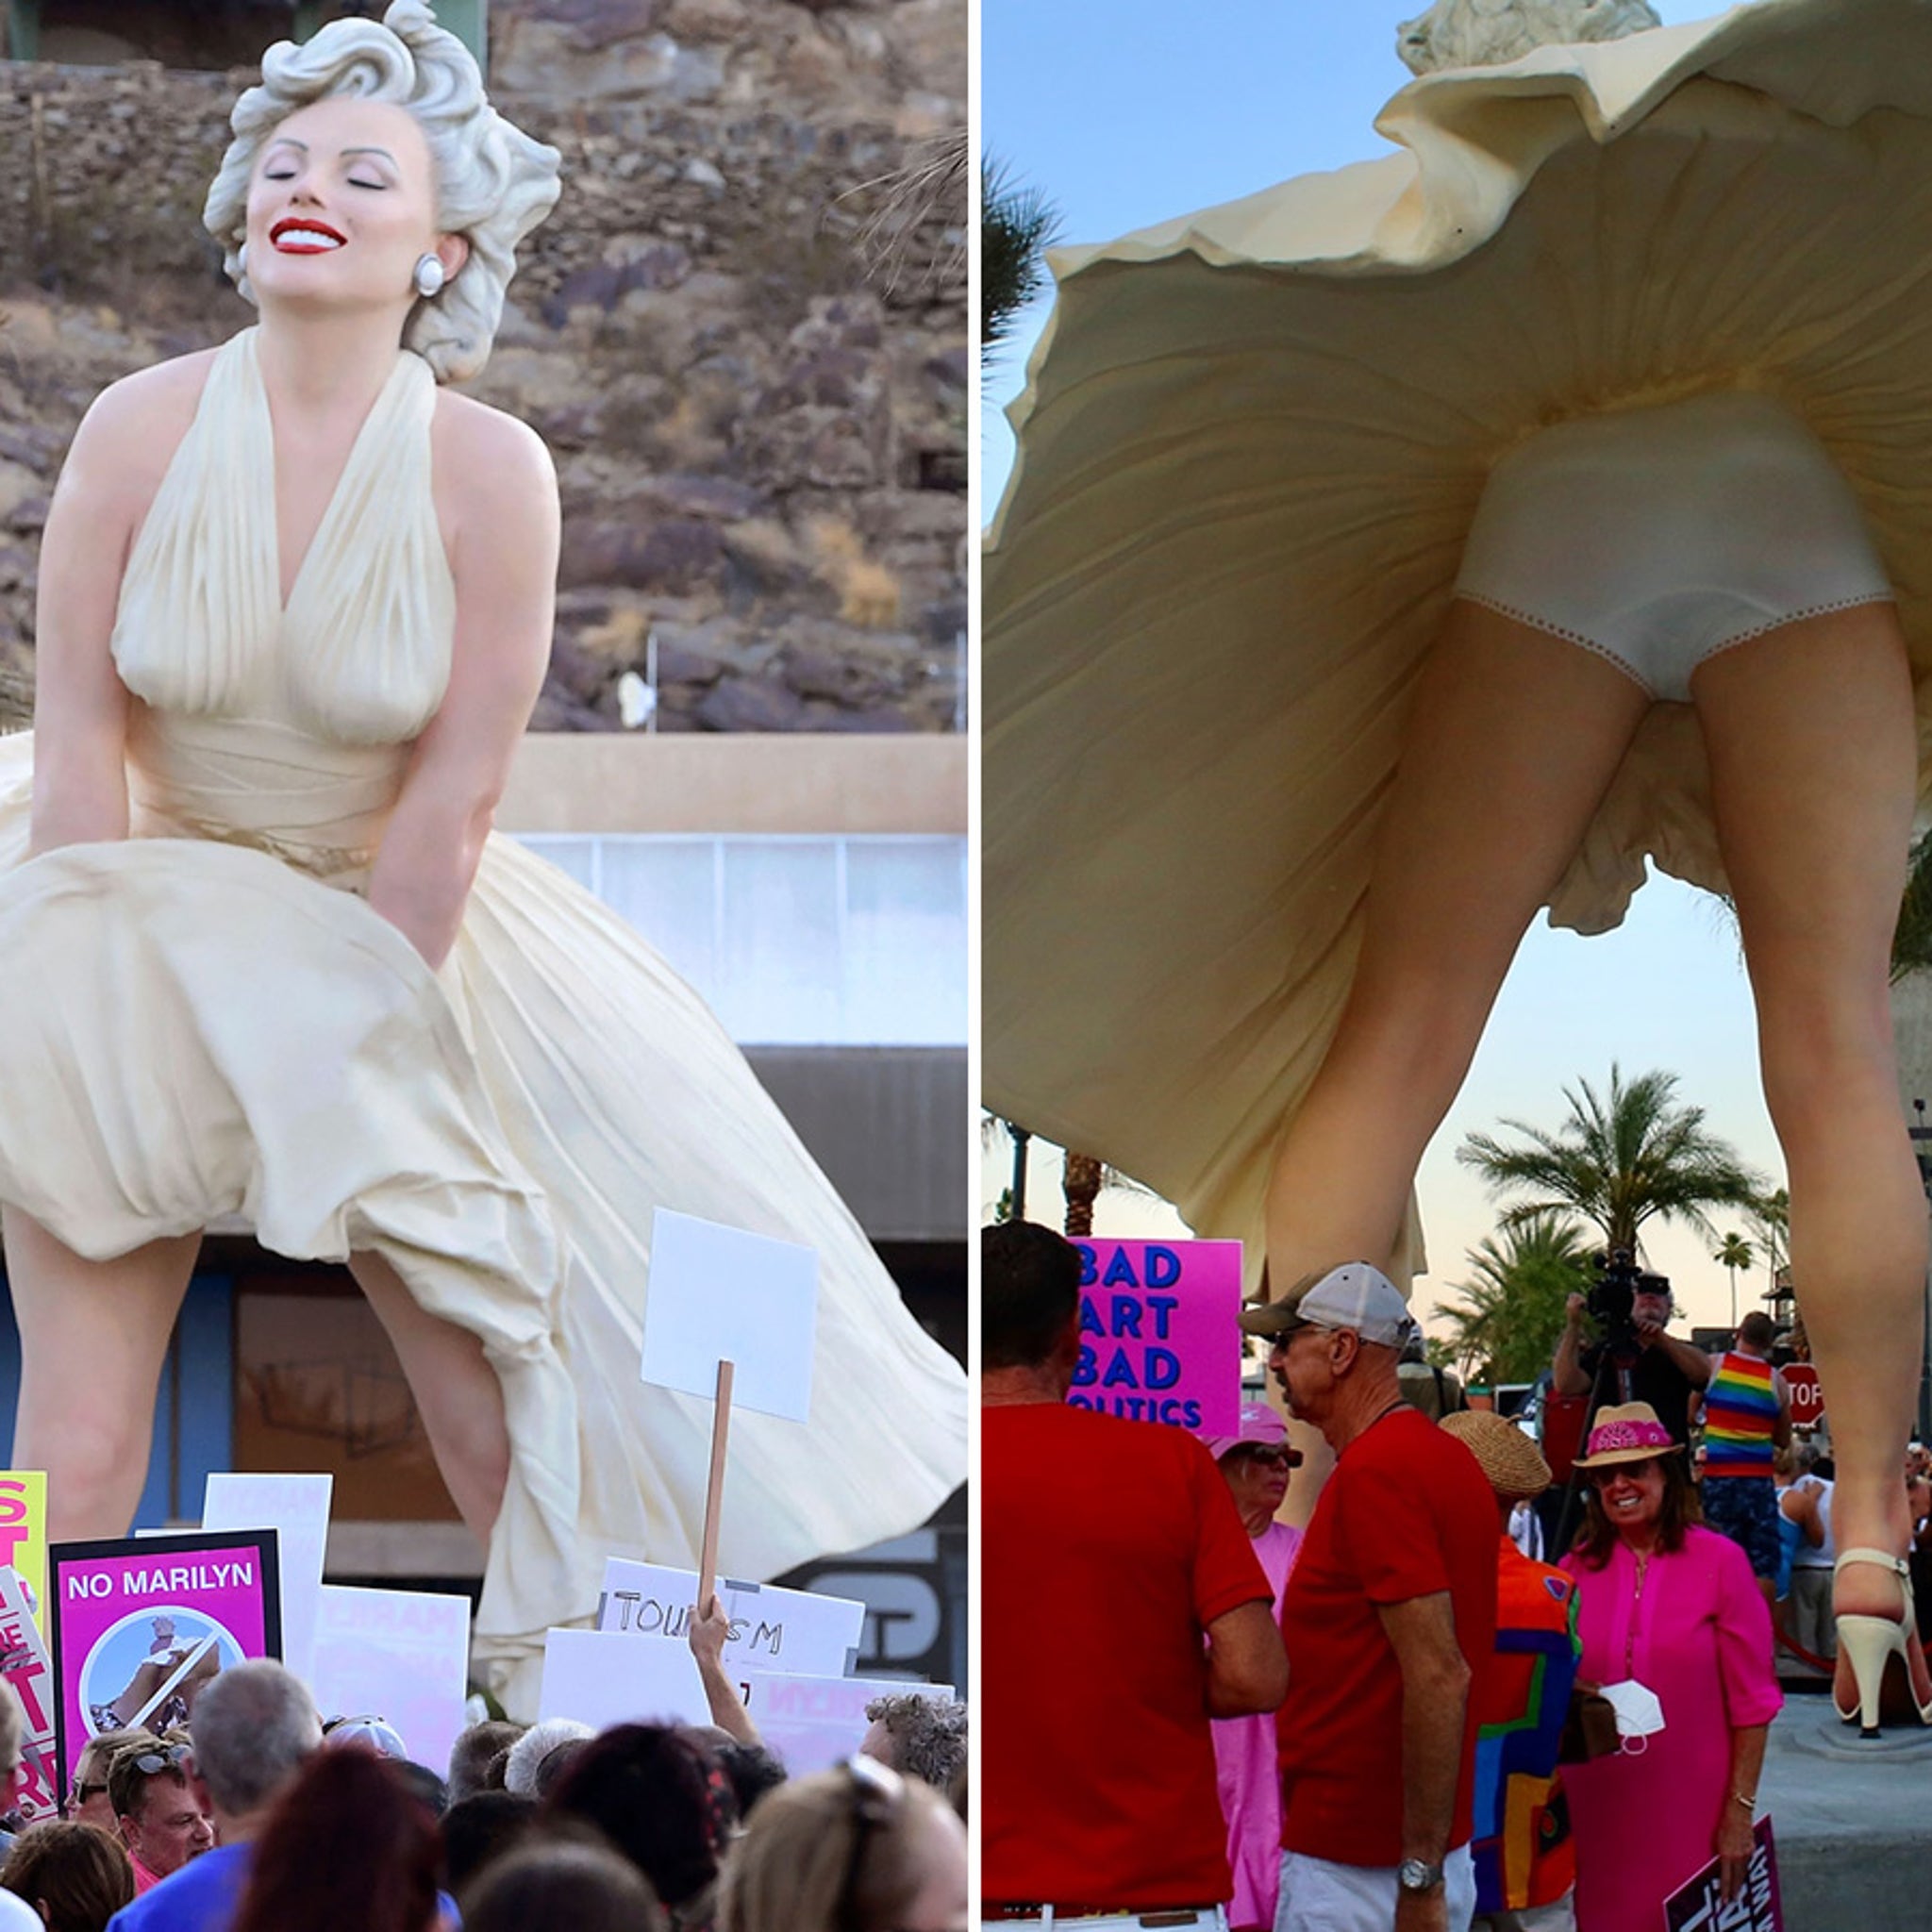 Huge Marilyn Monroe statue draws protest in Palm Springs – East Bay Times